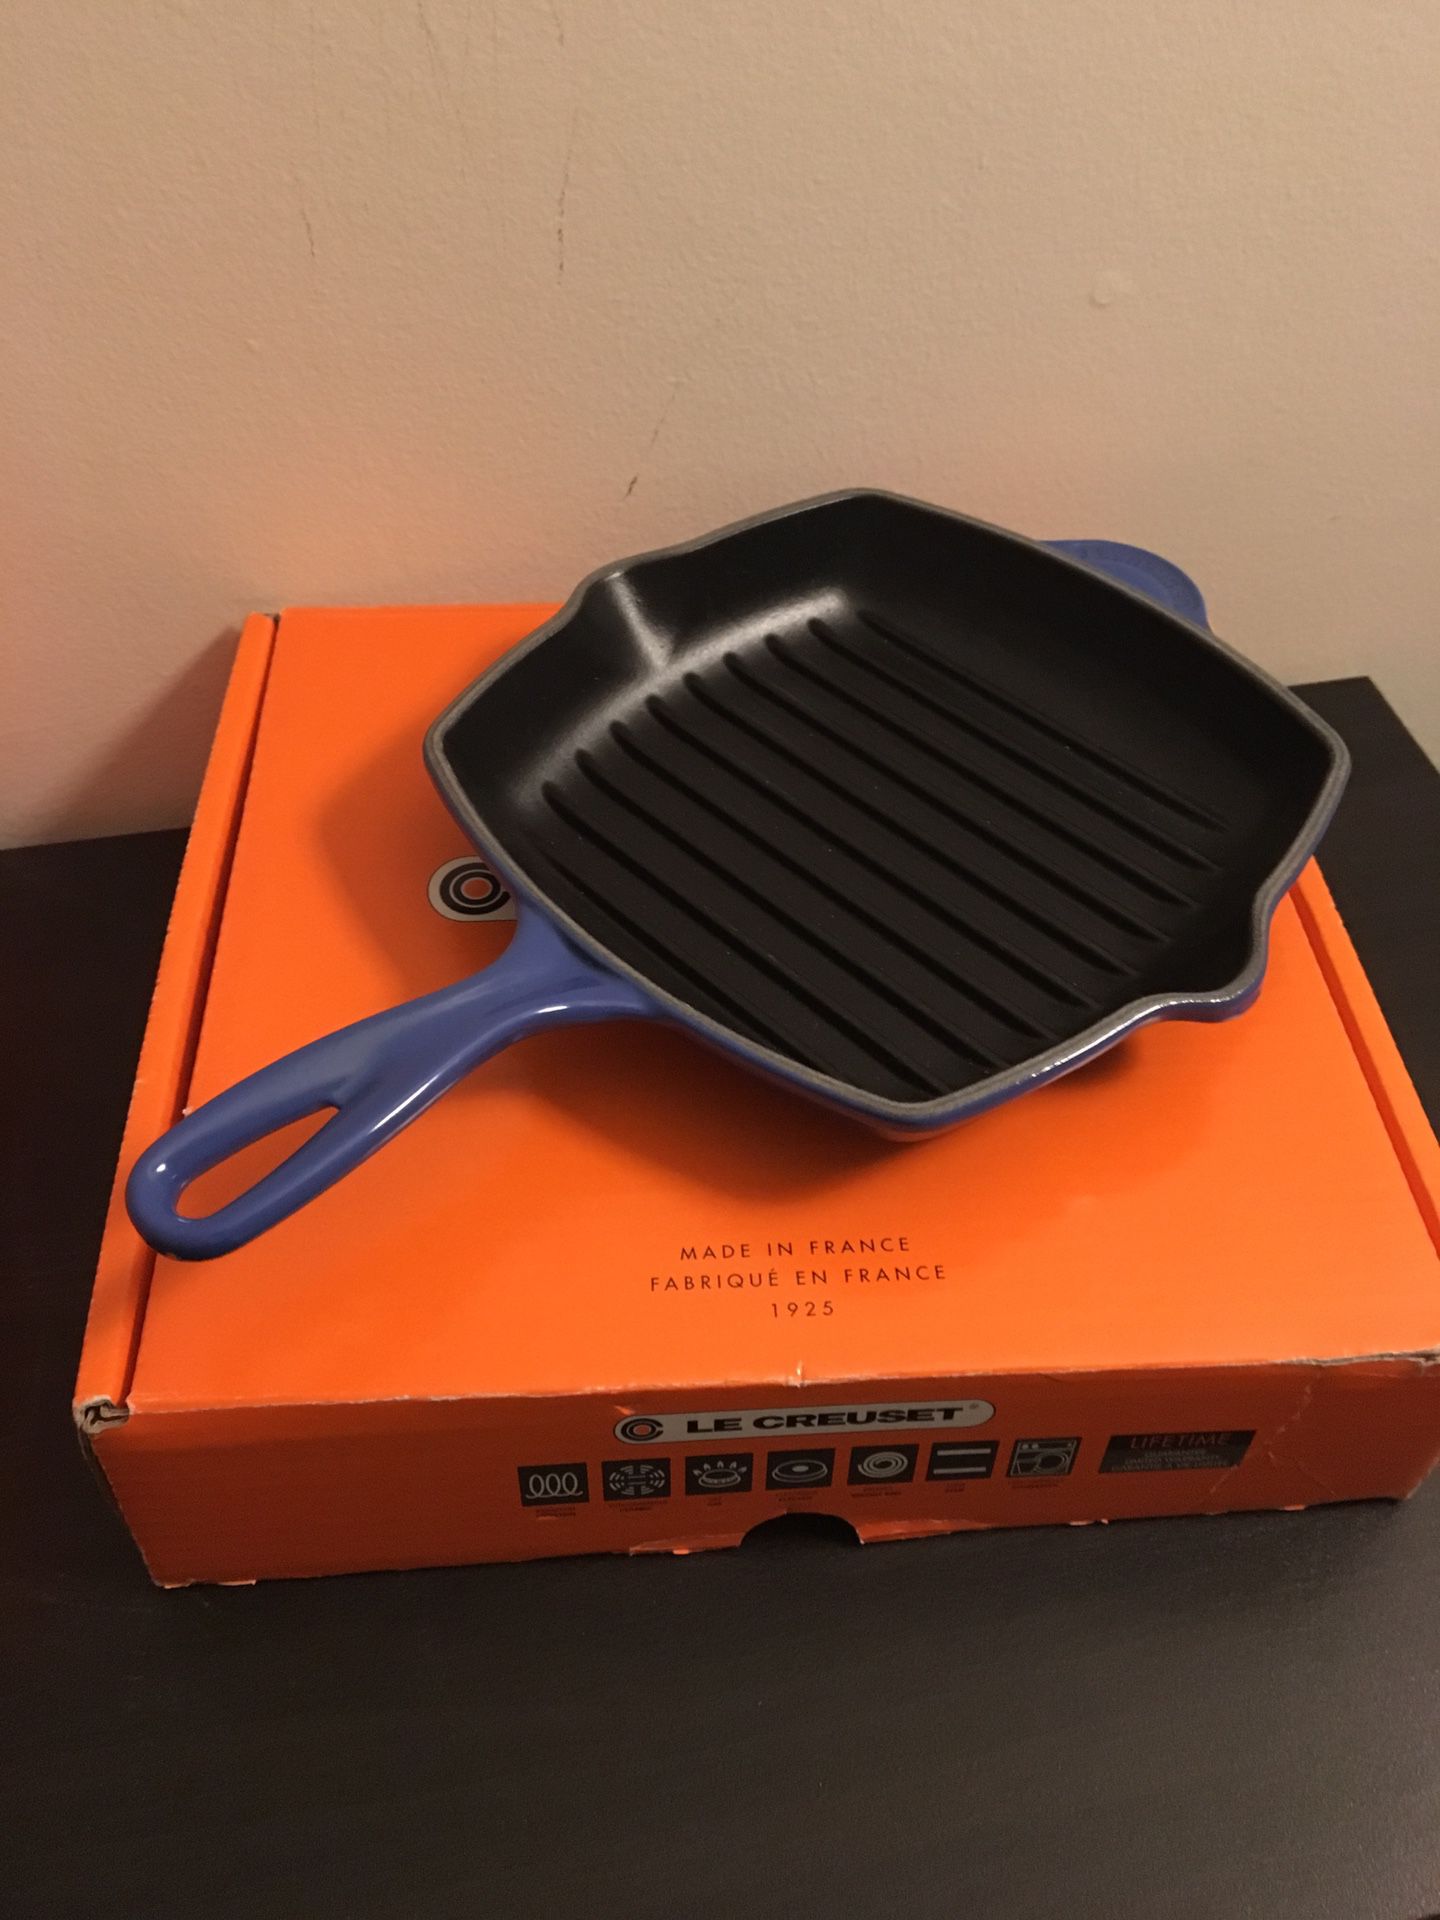 Le creuset skillet grill made in france